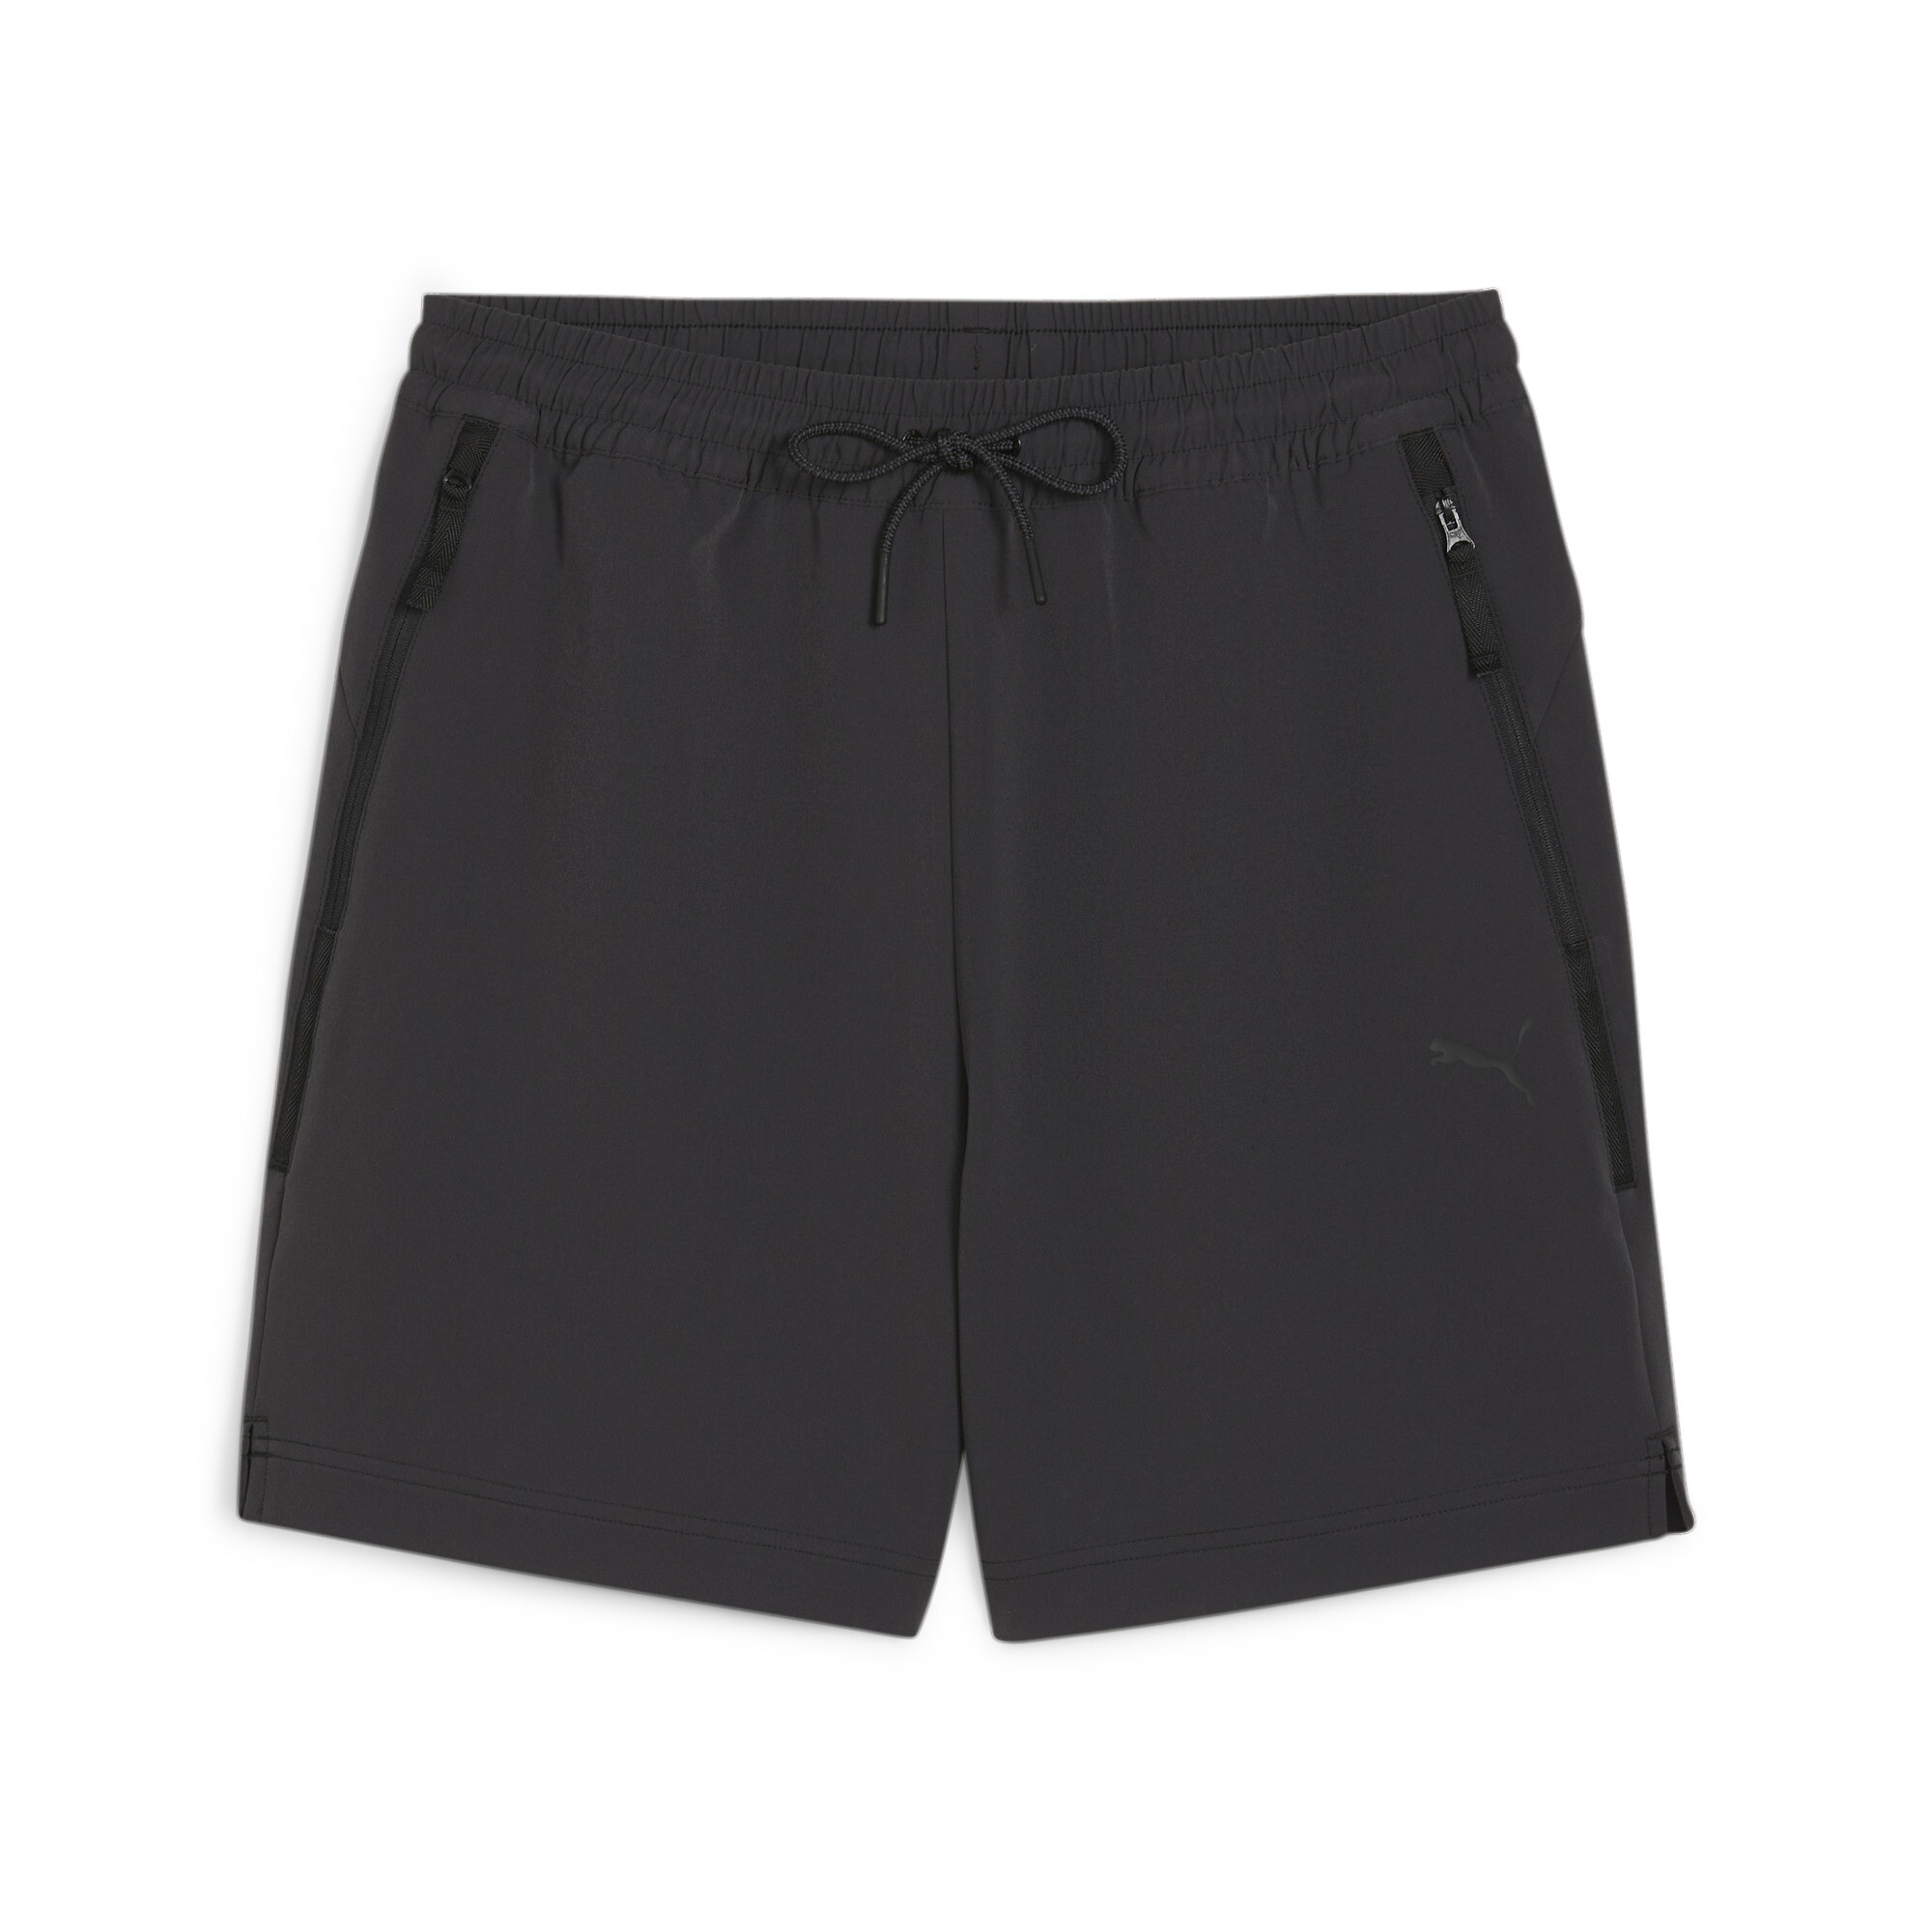 Men's PUMATECH Shorts In 10 - Black, Size Small